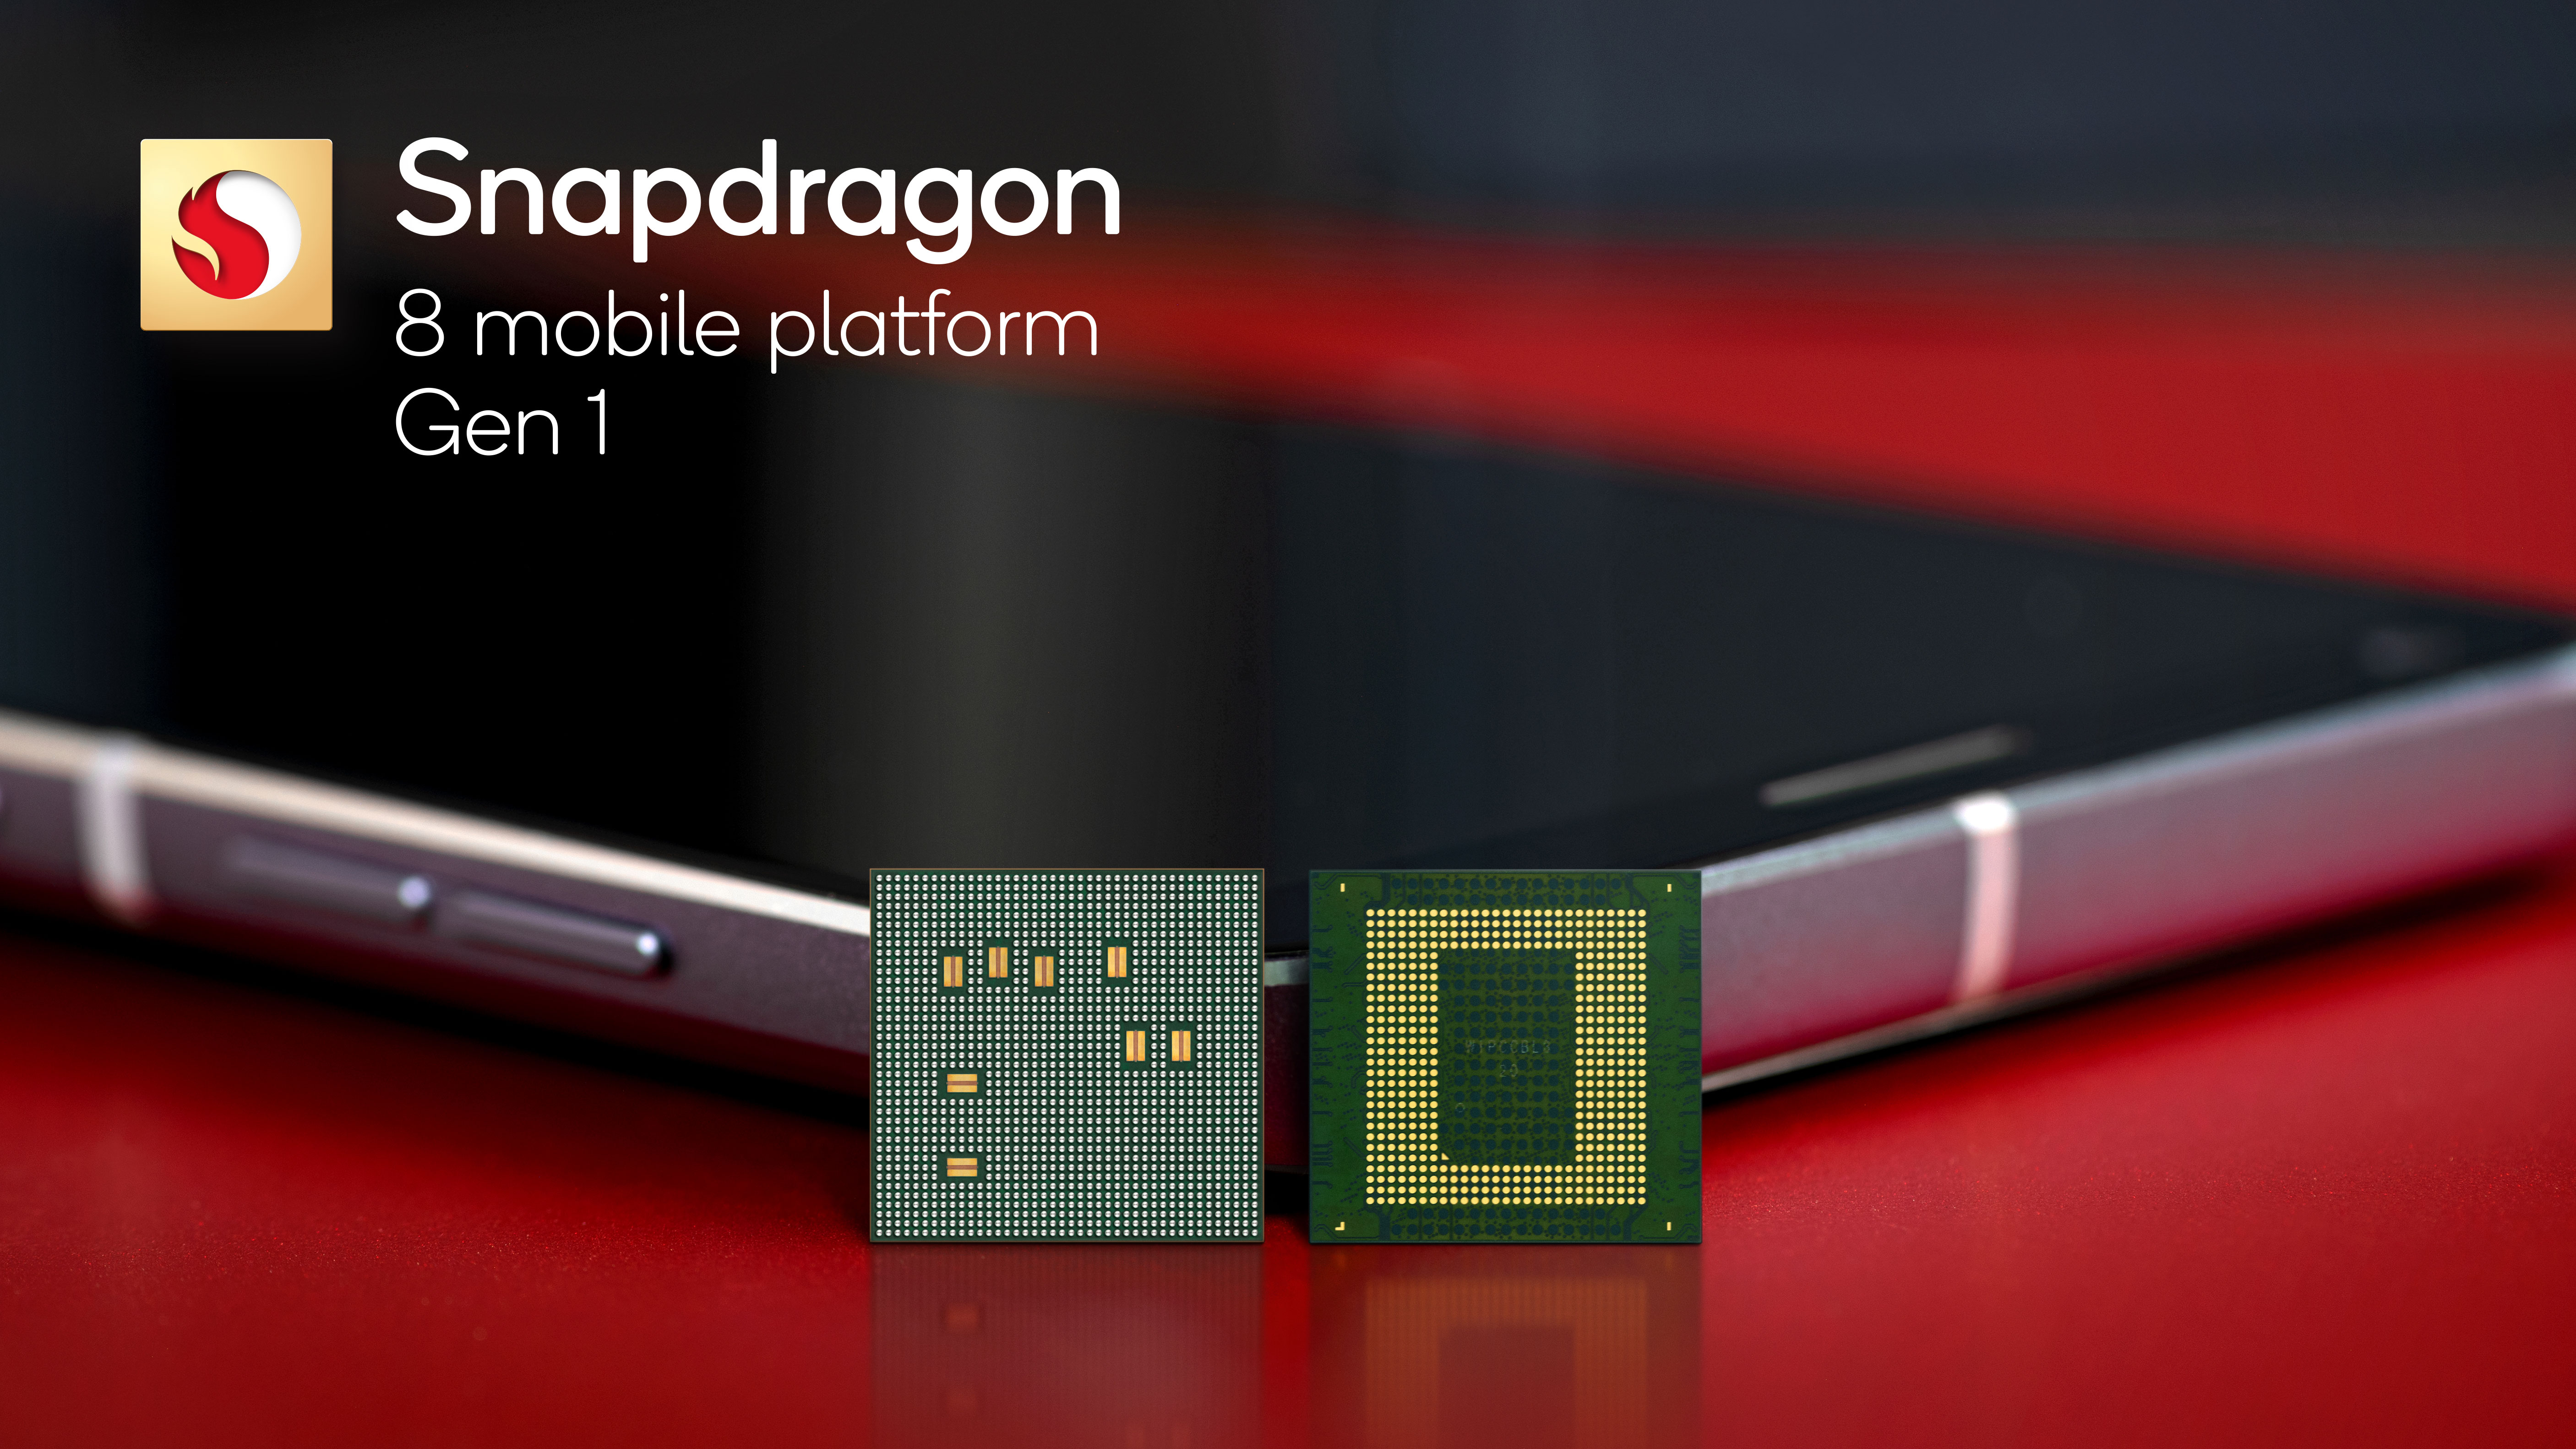 Qualcomm Snapdragon Summit 2021 live blog: the phone chip launch as it happened